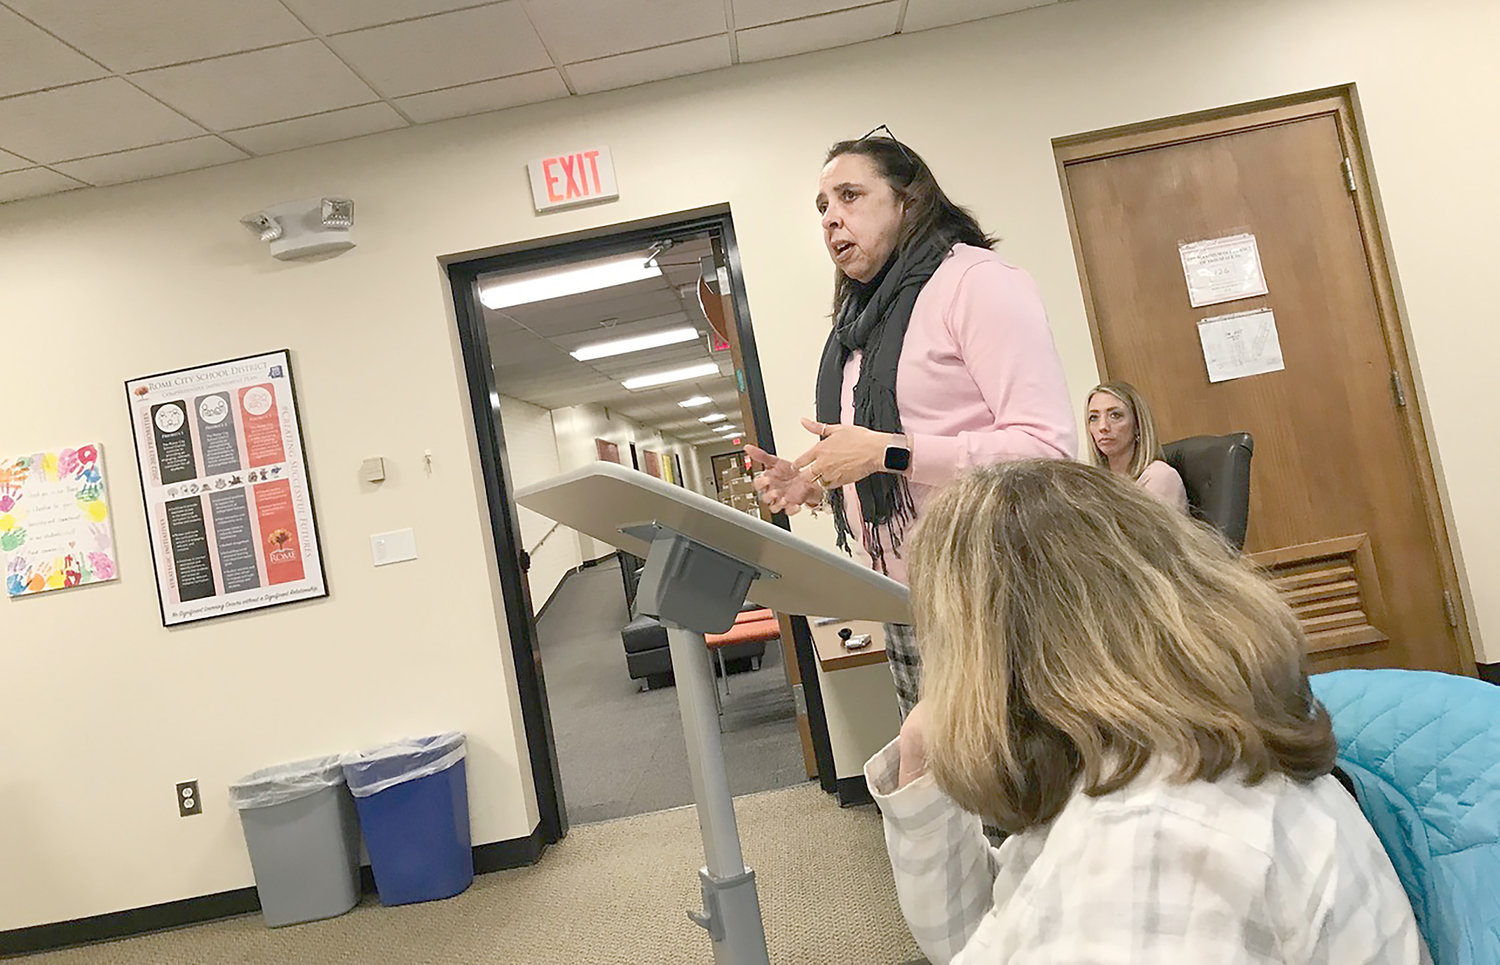 Jacqueline Nelson, president at NAACP Rome New York, addresses the Rome City School District Board of Education and its audience Monday, March 27, at the board’s regular meeting.